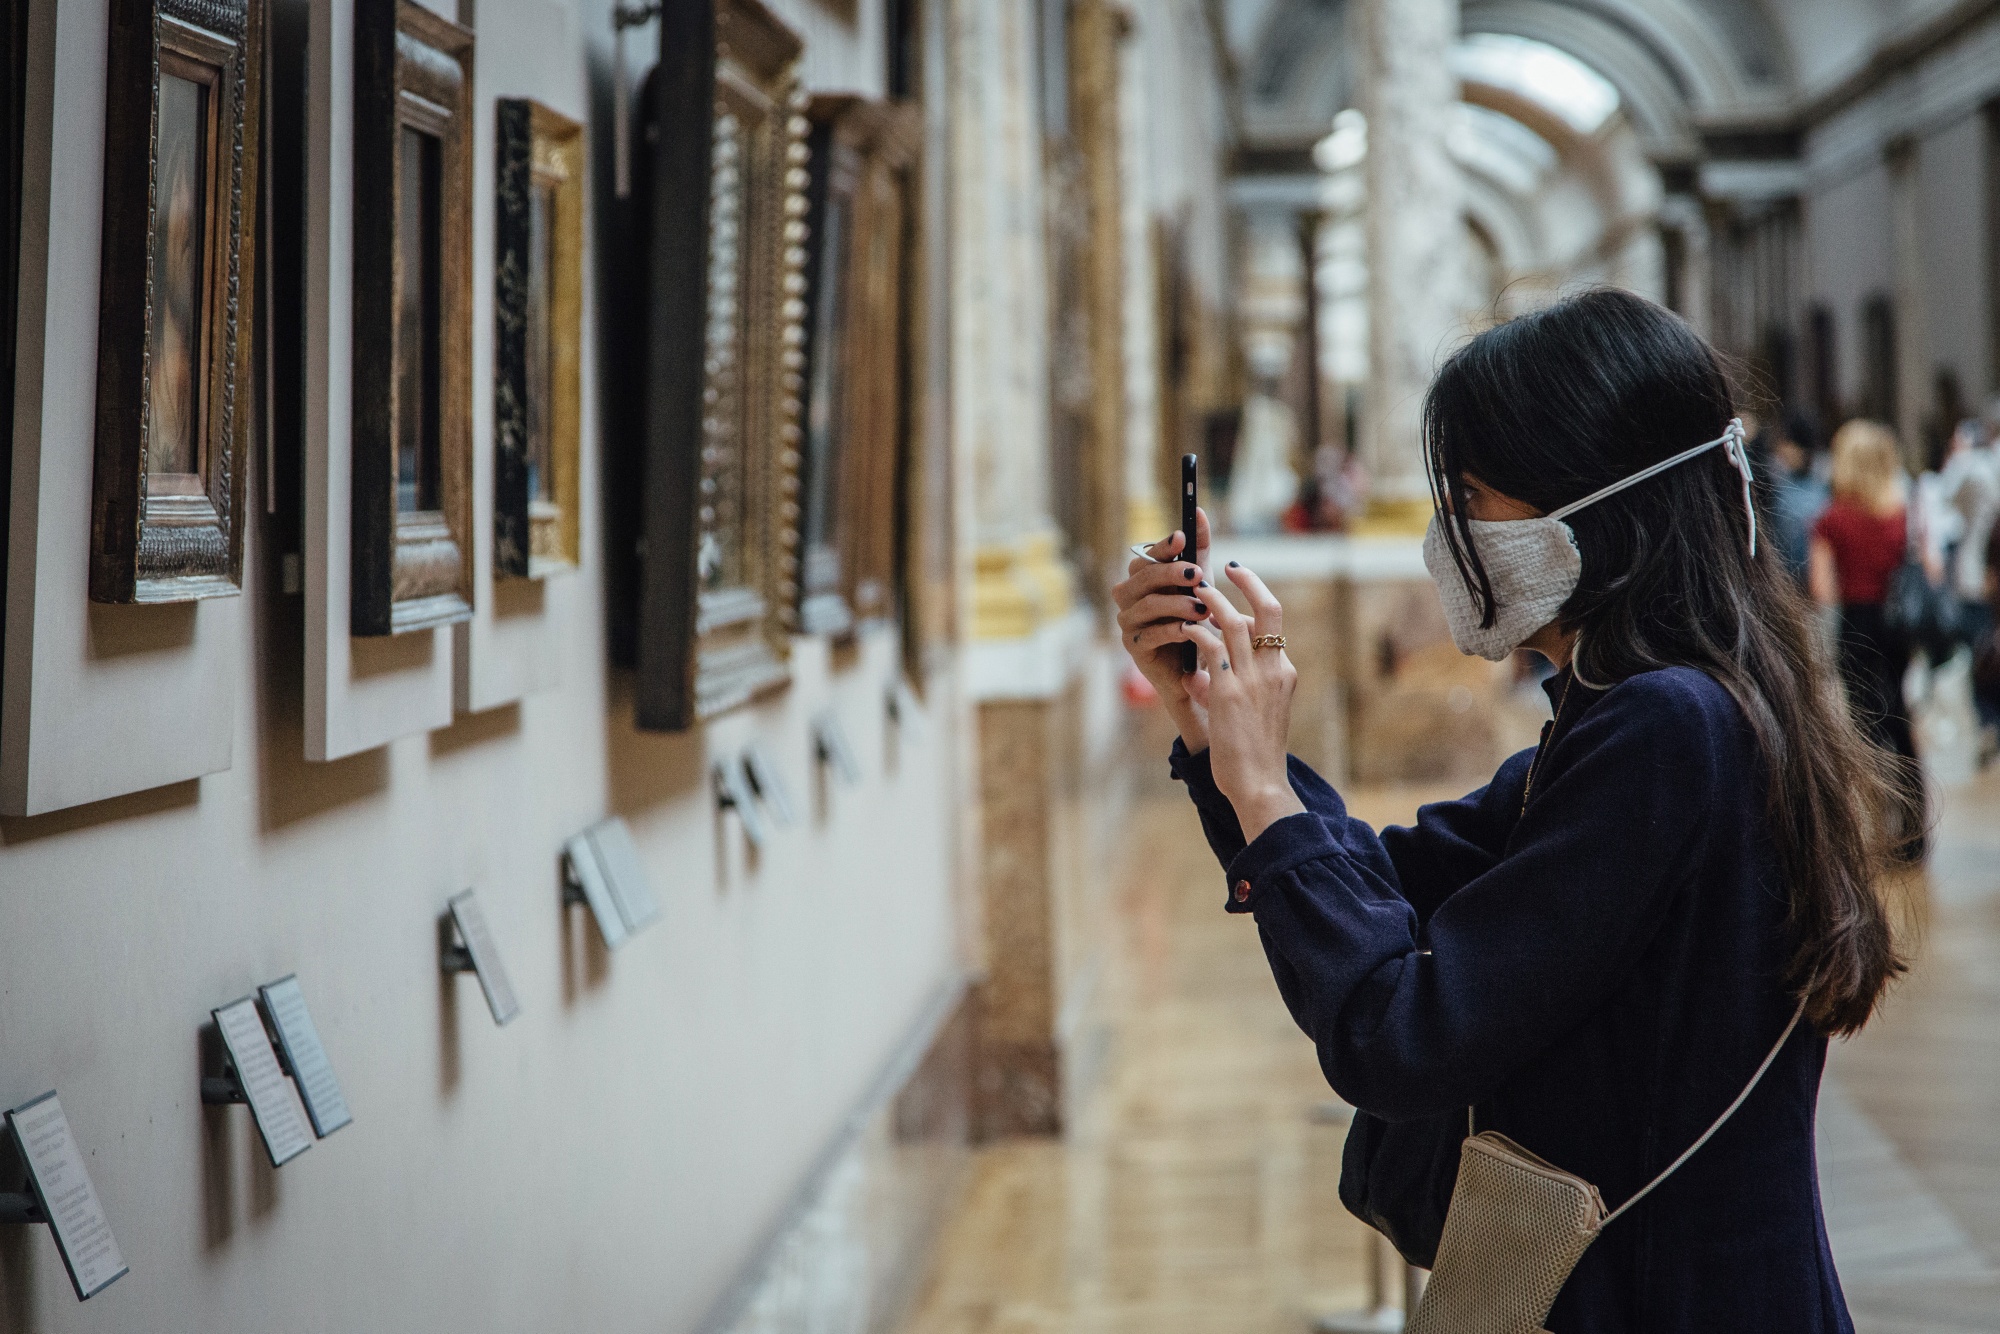 A visitor wearing a protective face mask takes a photograph of paintings in the Louvre Museum in Paris, France, on&nbsp;July 6.&nbsp;